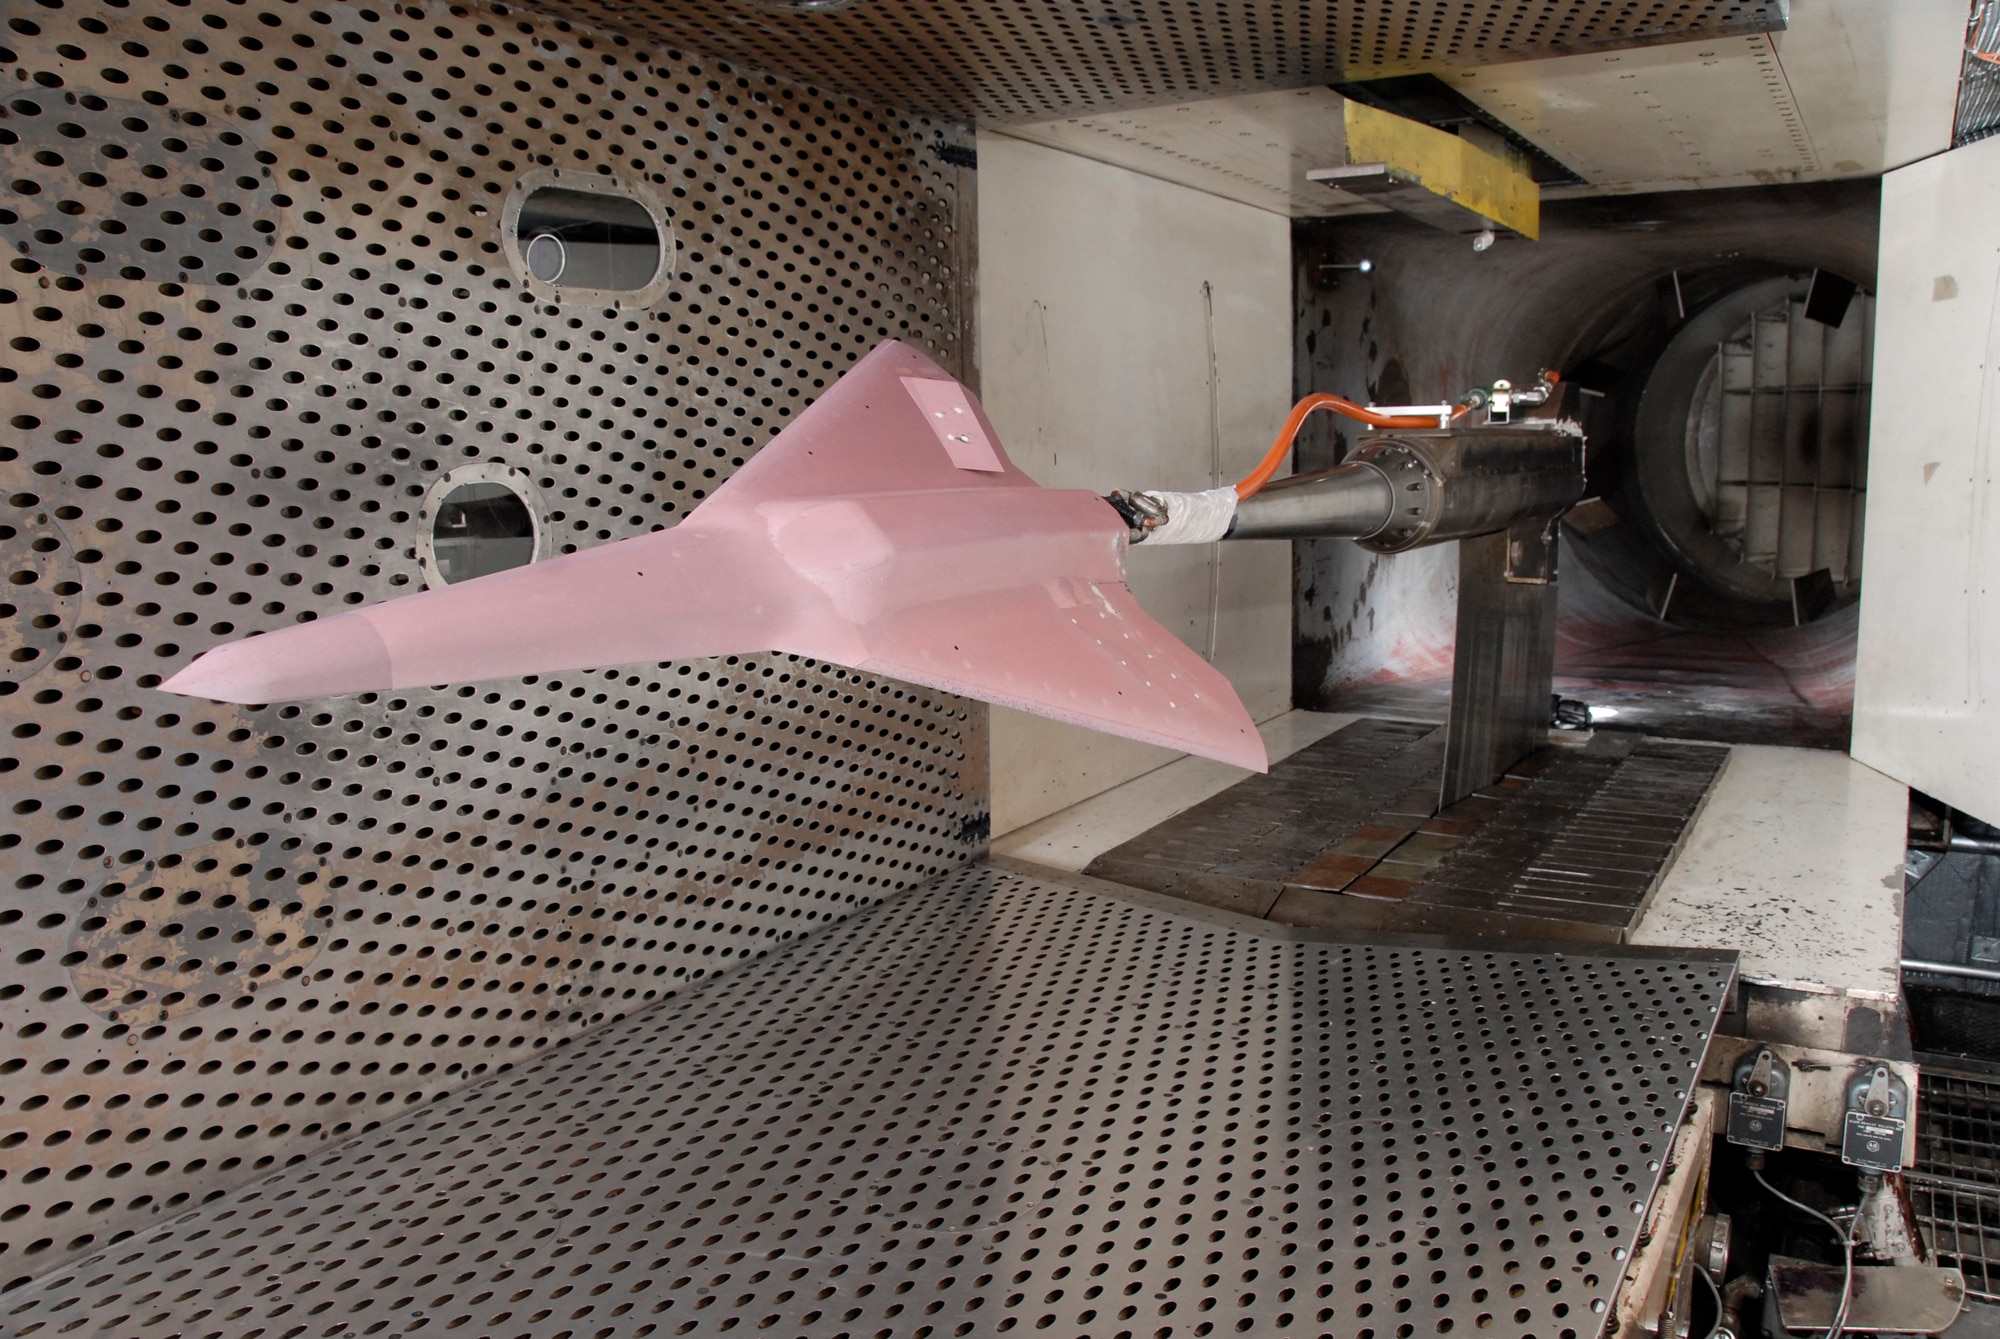 A one-eighteenth scale model of an Air Force tailless aircraft recently underwent aerodynamic testing in Arnold Engineering Development Center’s four-foot transonic wind tunnel. The test was a technology demonstration entry in which conventional methods and Pressure Sensitive Paint were used to compare the effectiveness of a jet effects spoiler with a solid spoiler in yaw and roll control and stability of the aircraft. (Photos by Rick Goodfriend)